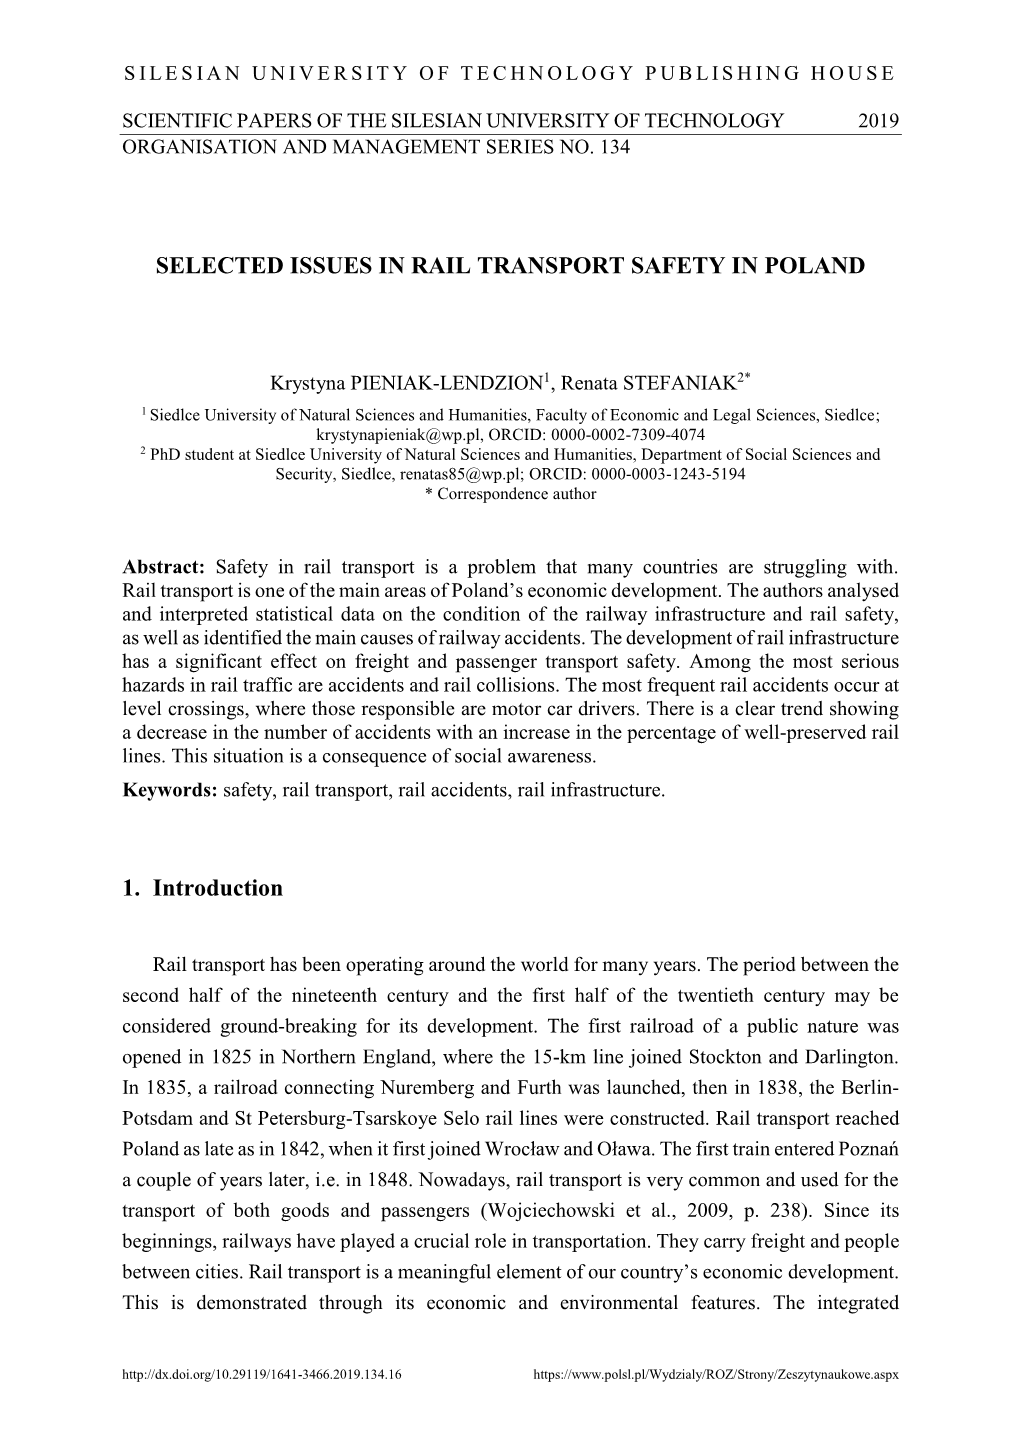 Selected Issues in Rail Transport Safety in Poland